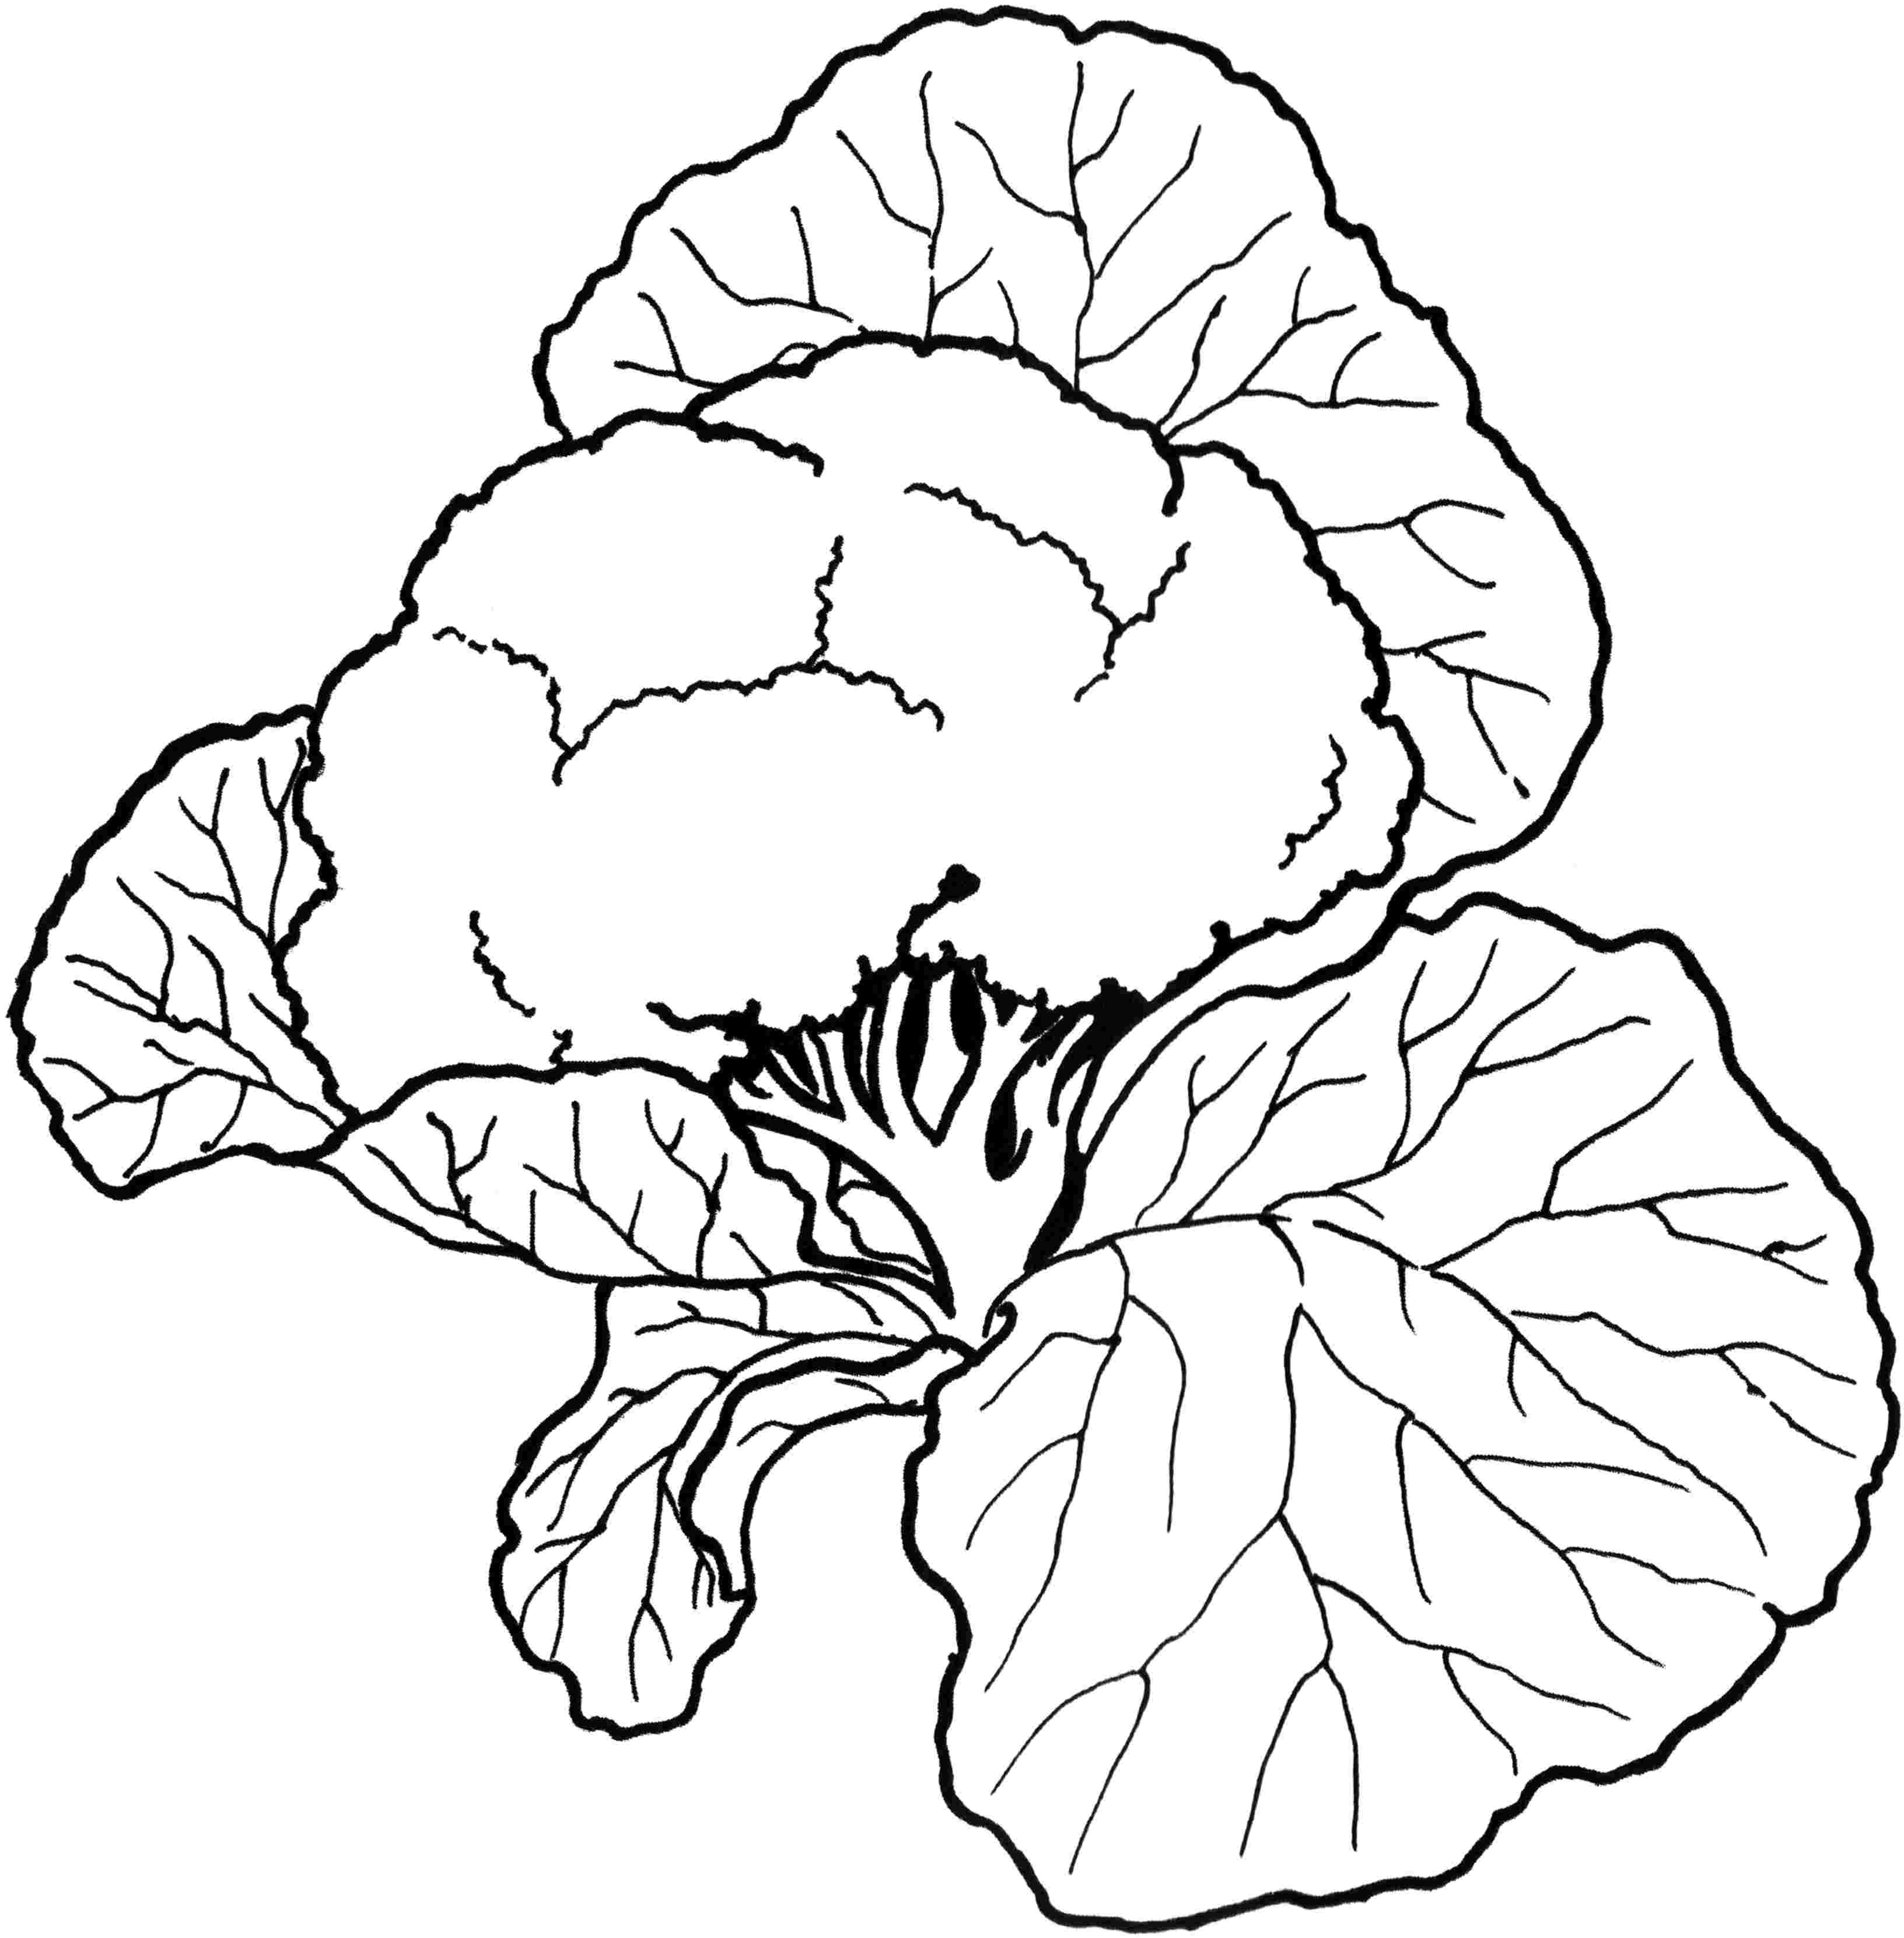 Fruit And Vegetable Coloring Pages For Kids 130 | Free Printable ...